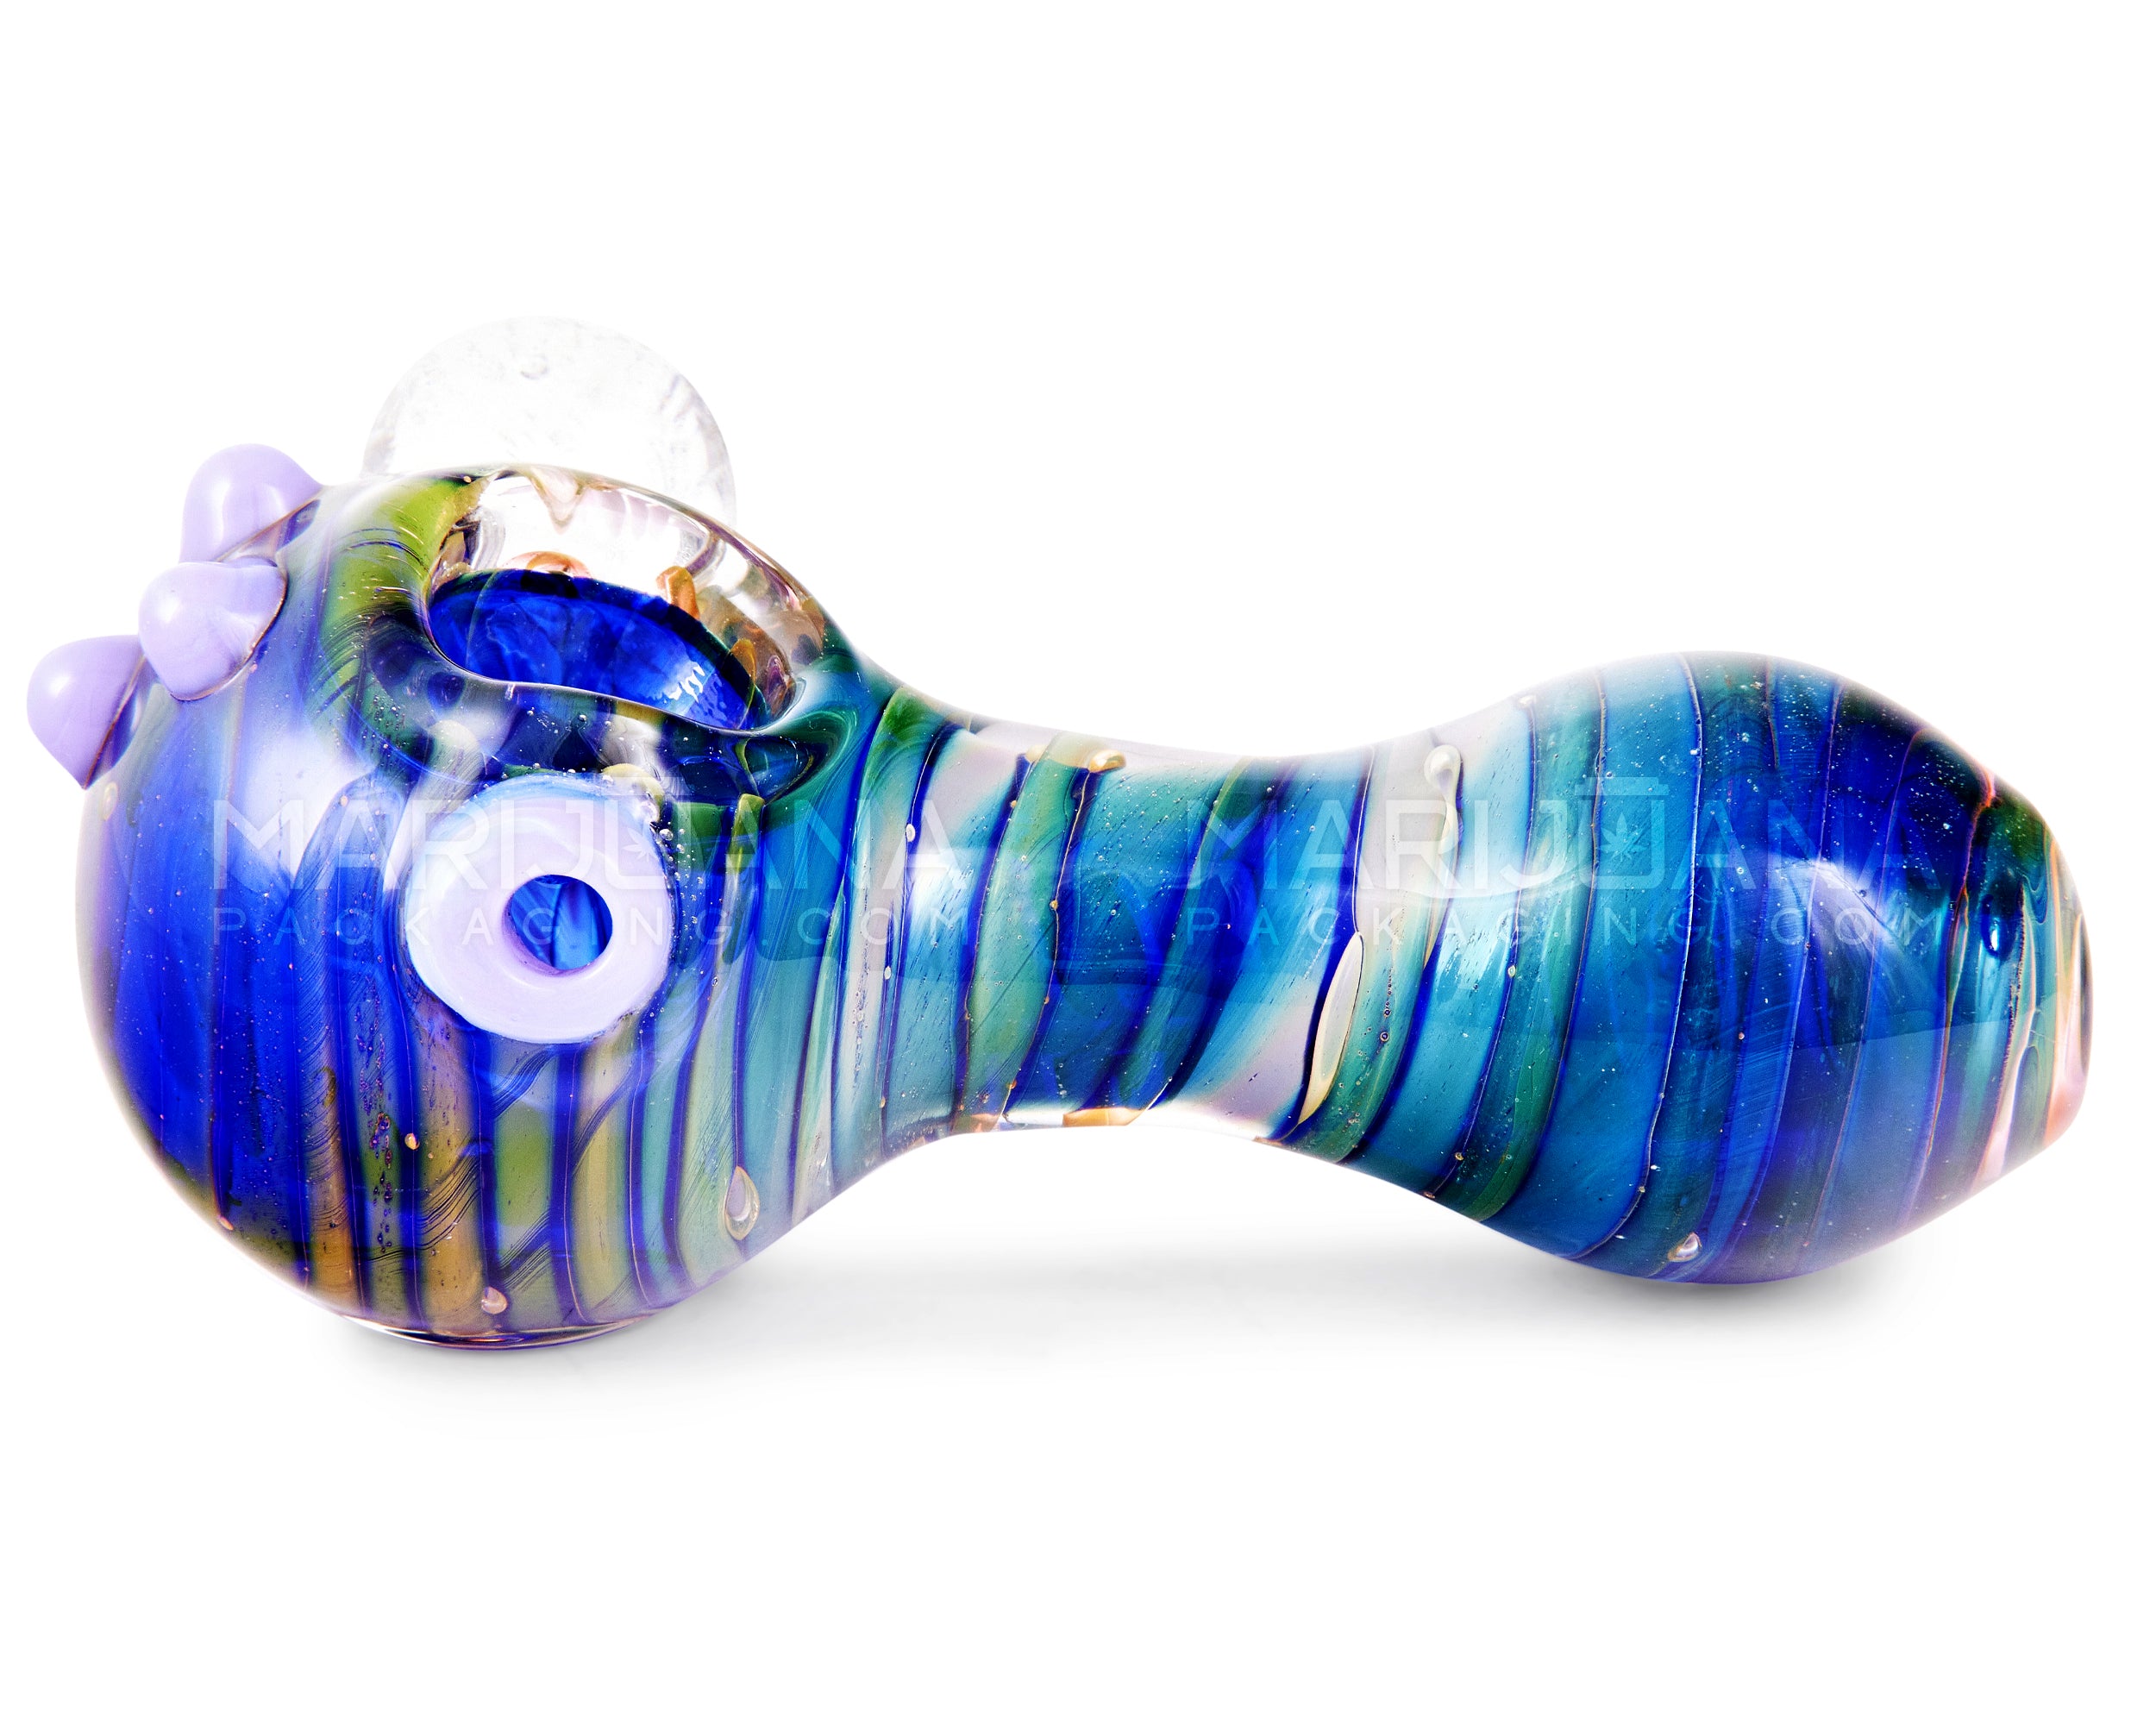 Fumed & Spiral Spoon Hand Pipe w/ Flower Implosion Marble & Triple Knockers | 4.5in Long - Glass - Assorted - 5